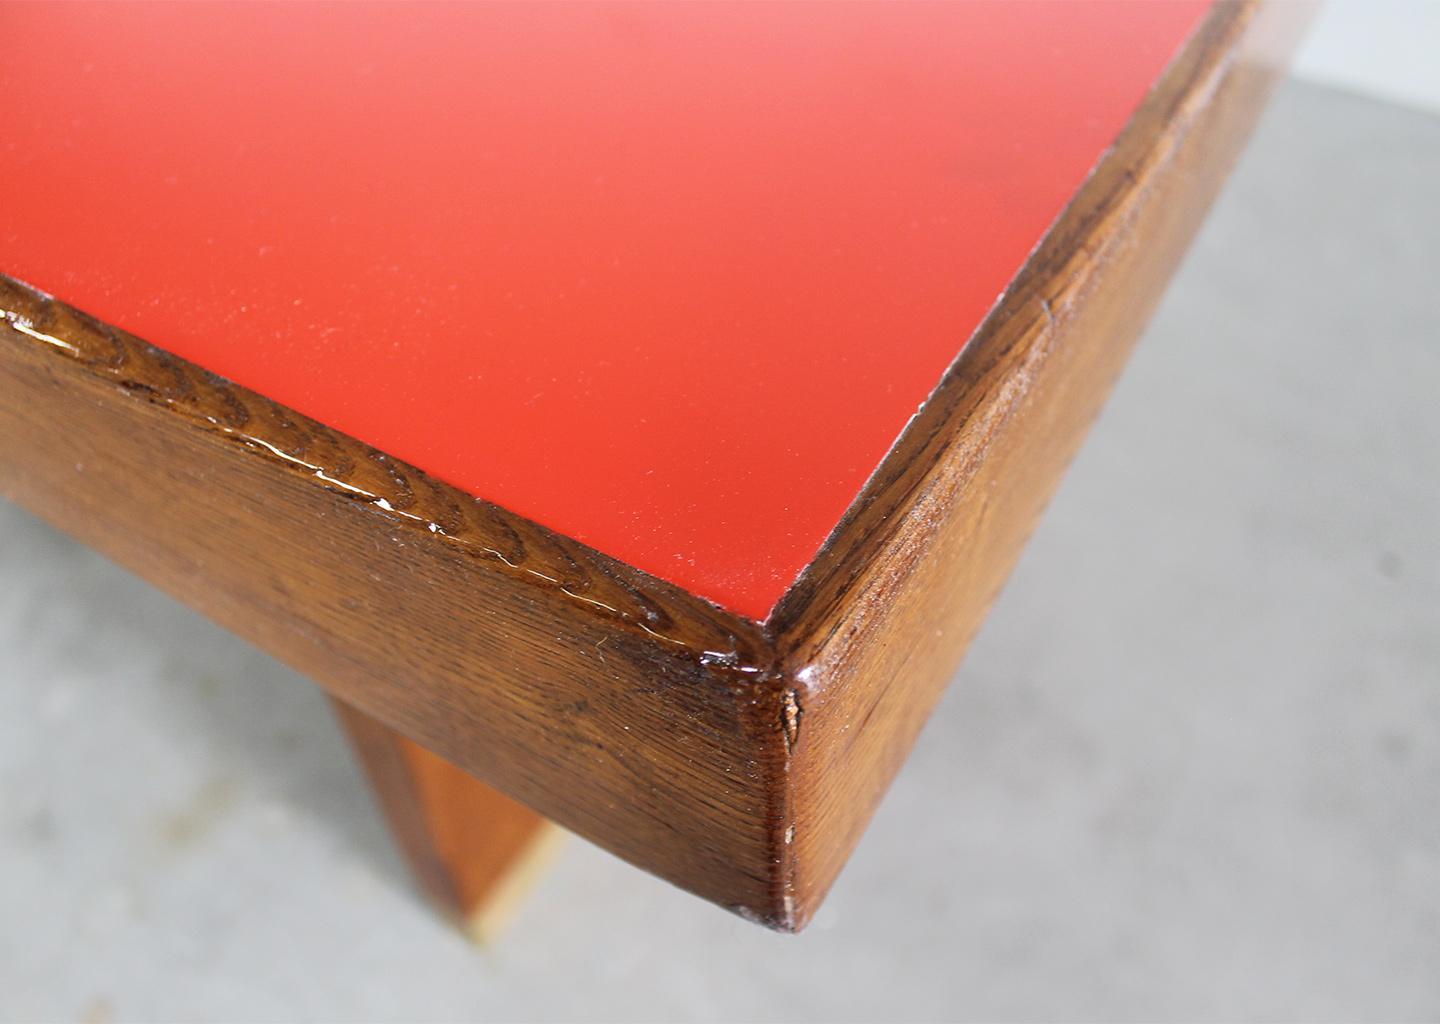 Gio Ponti Table in Oak Brass and Red Laminate Italian Manifacture 1950s For Sale 3